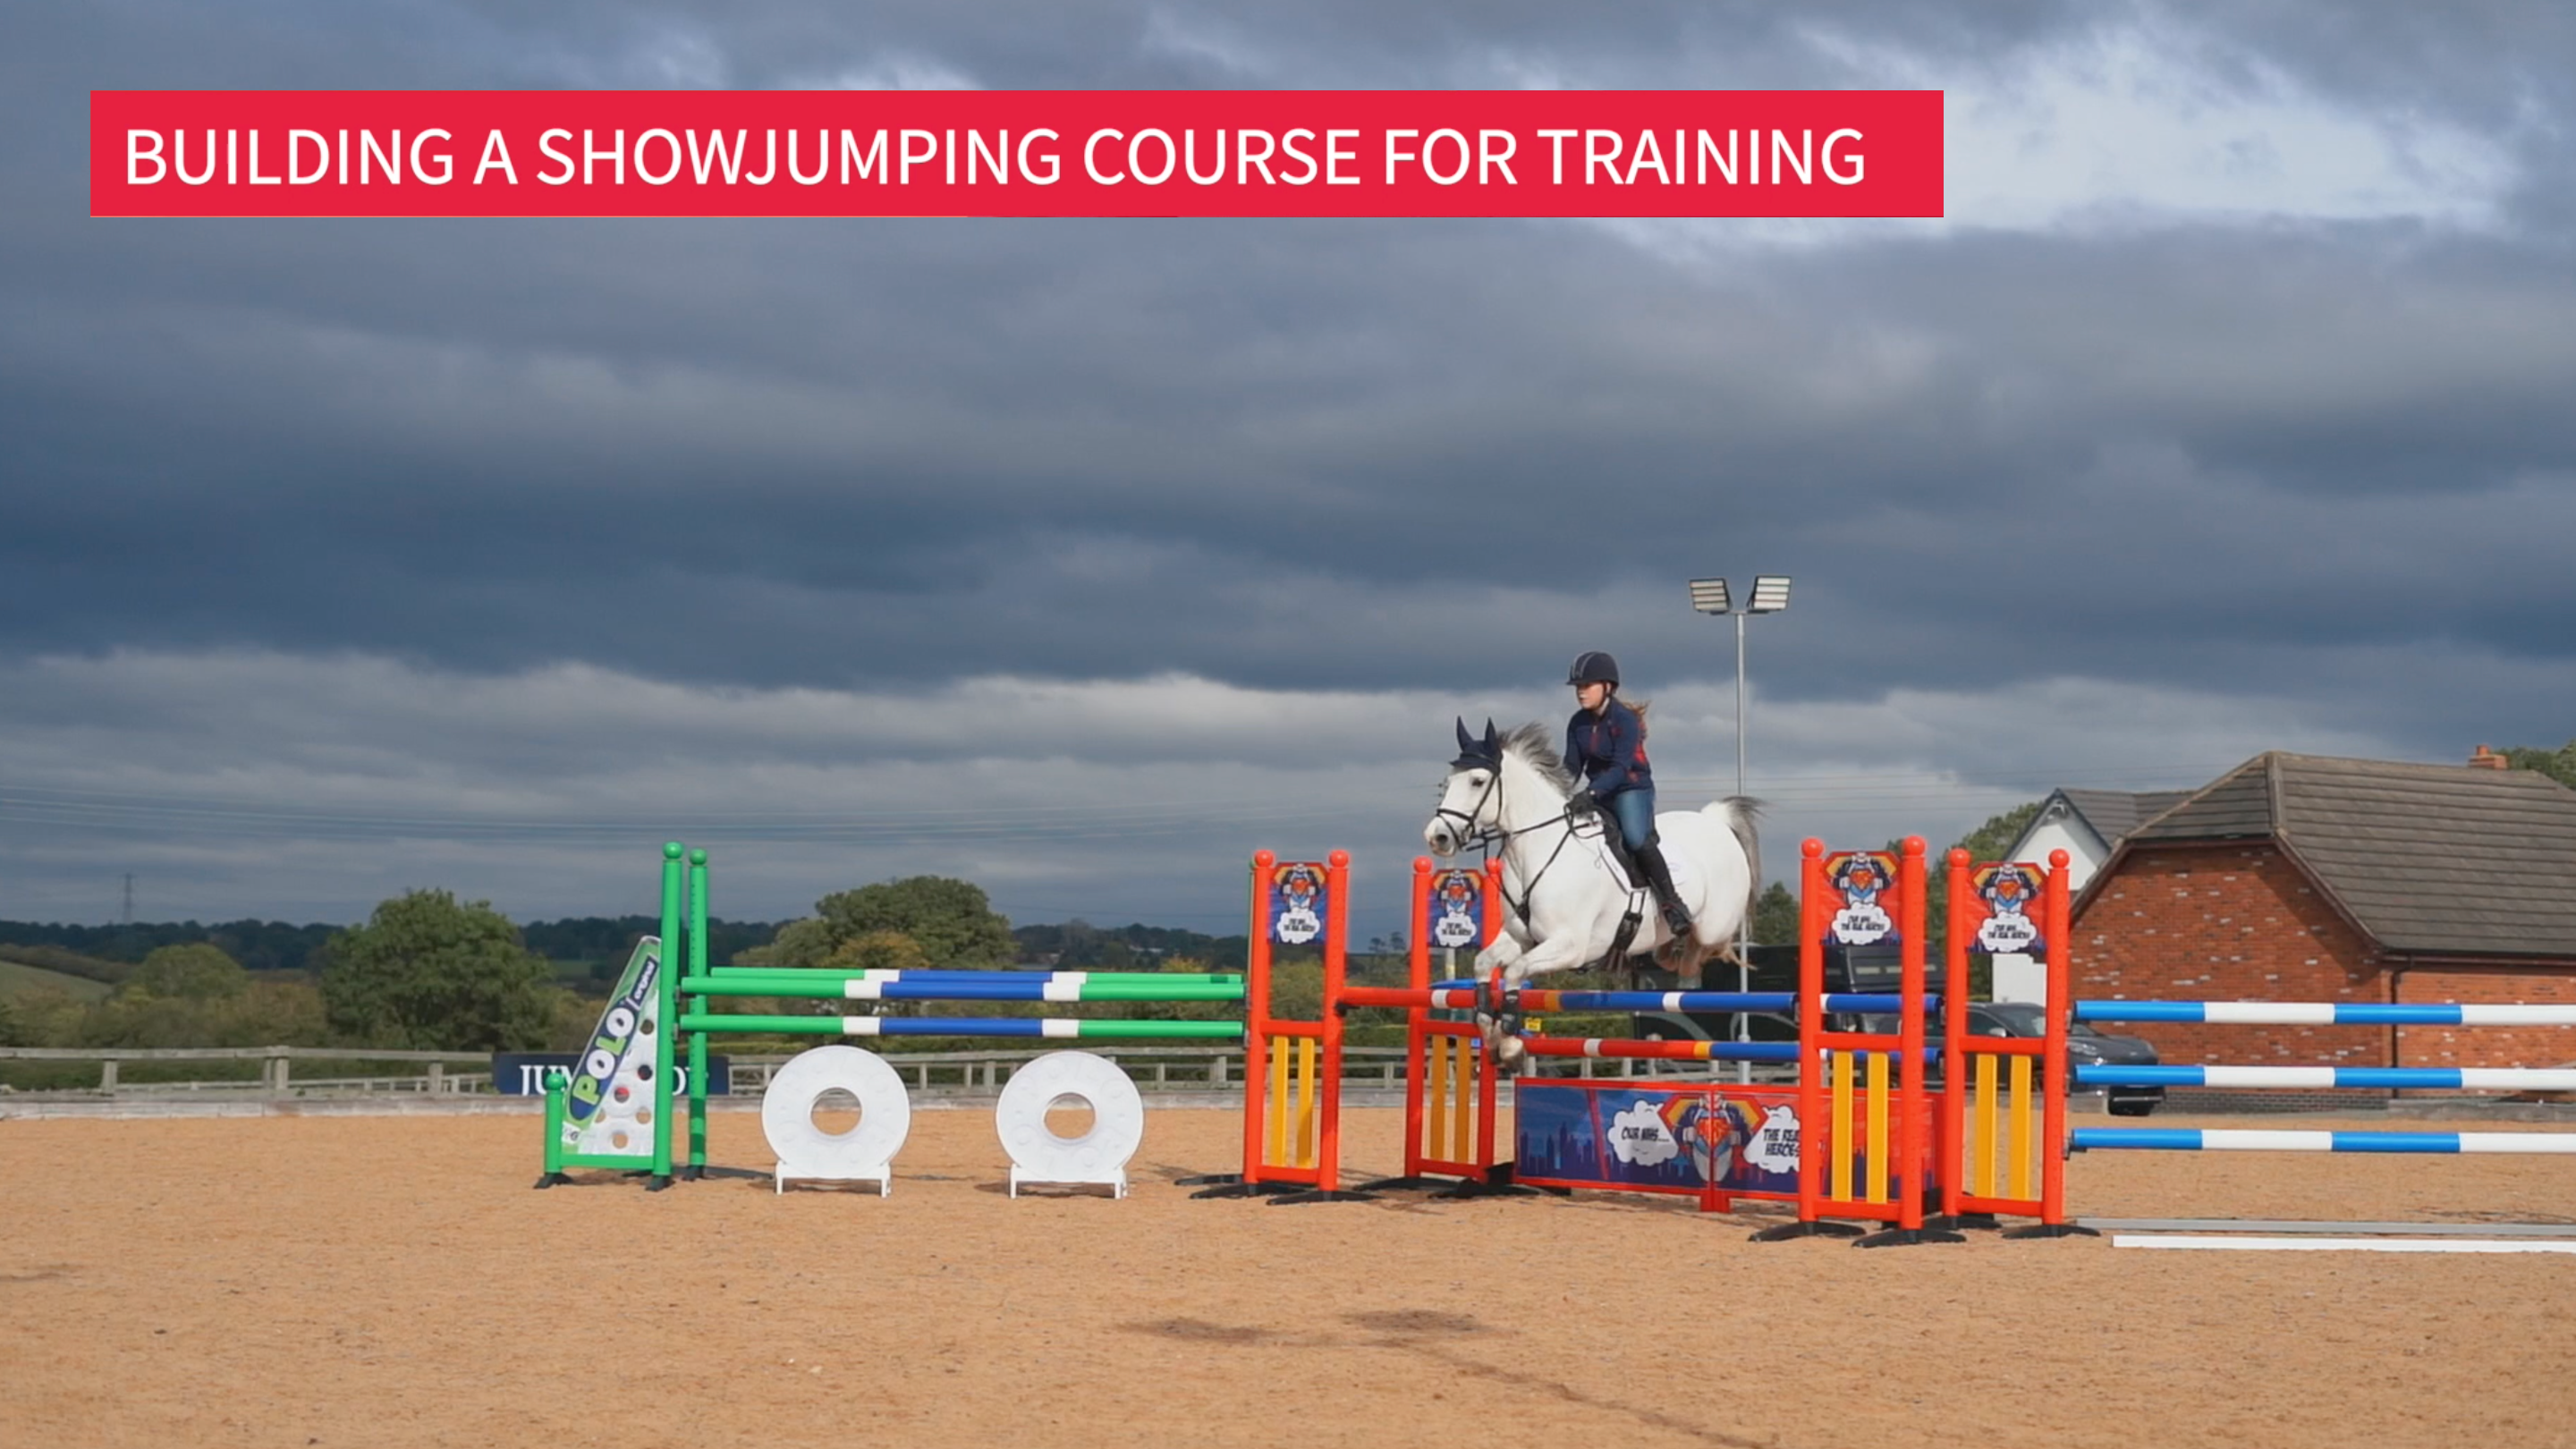 Building a Showjumping Course for Training